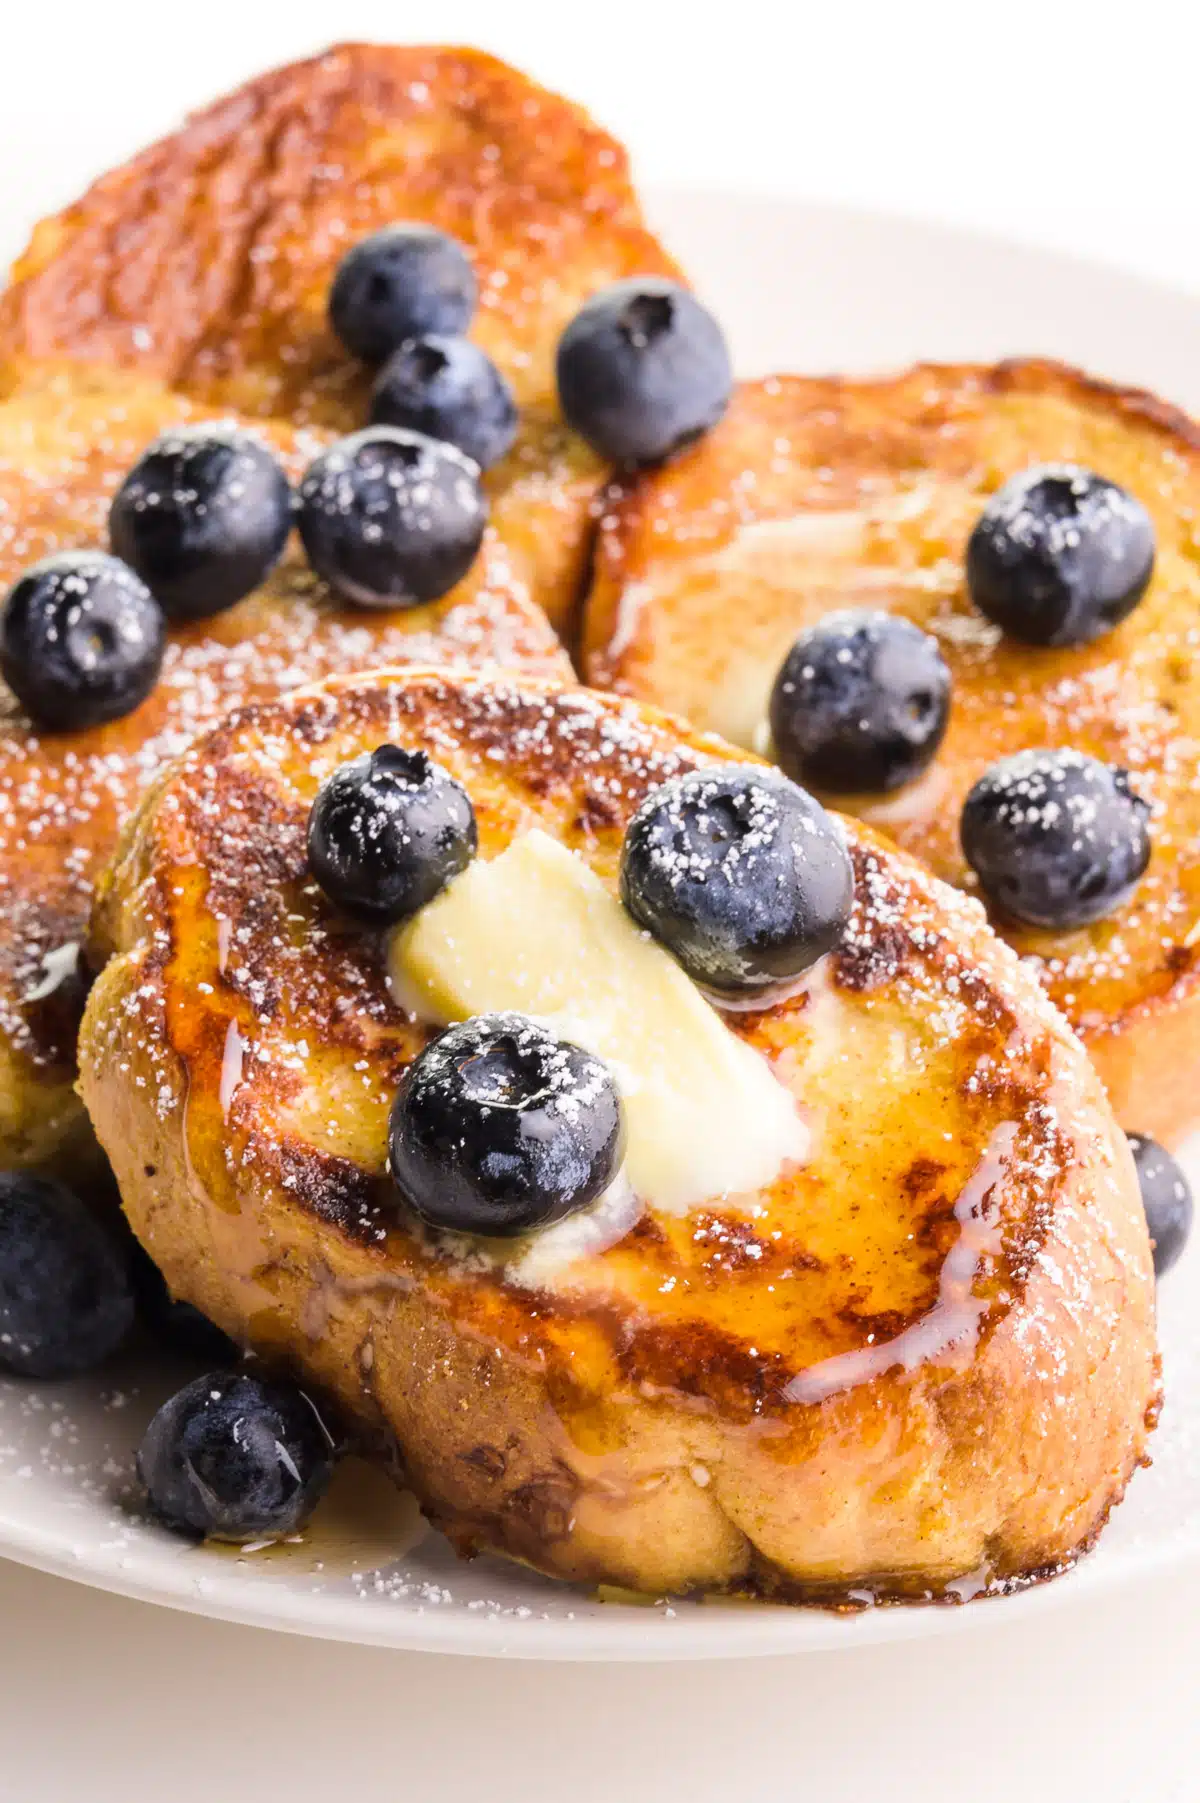 Slices of French toast are topped with blueberries, butter, and maple syrup.